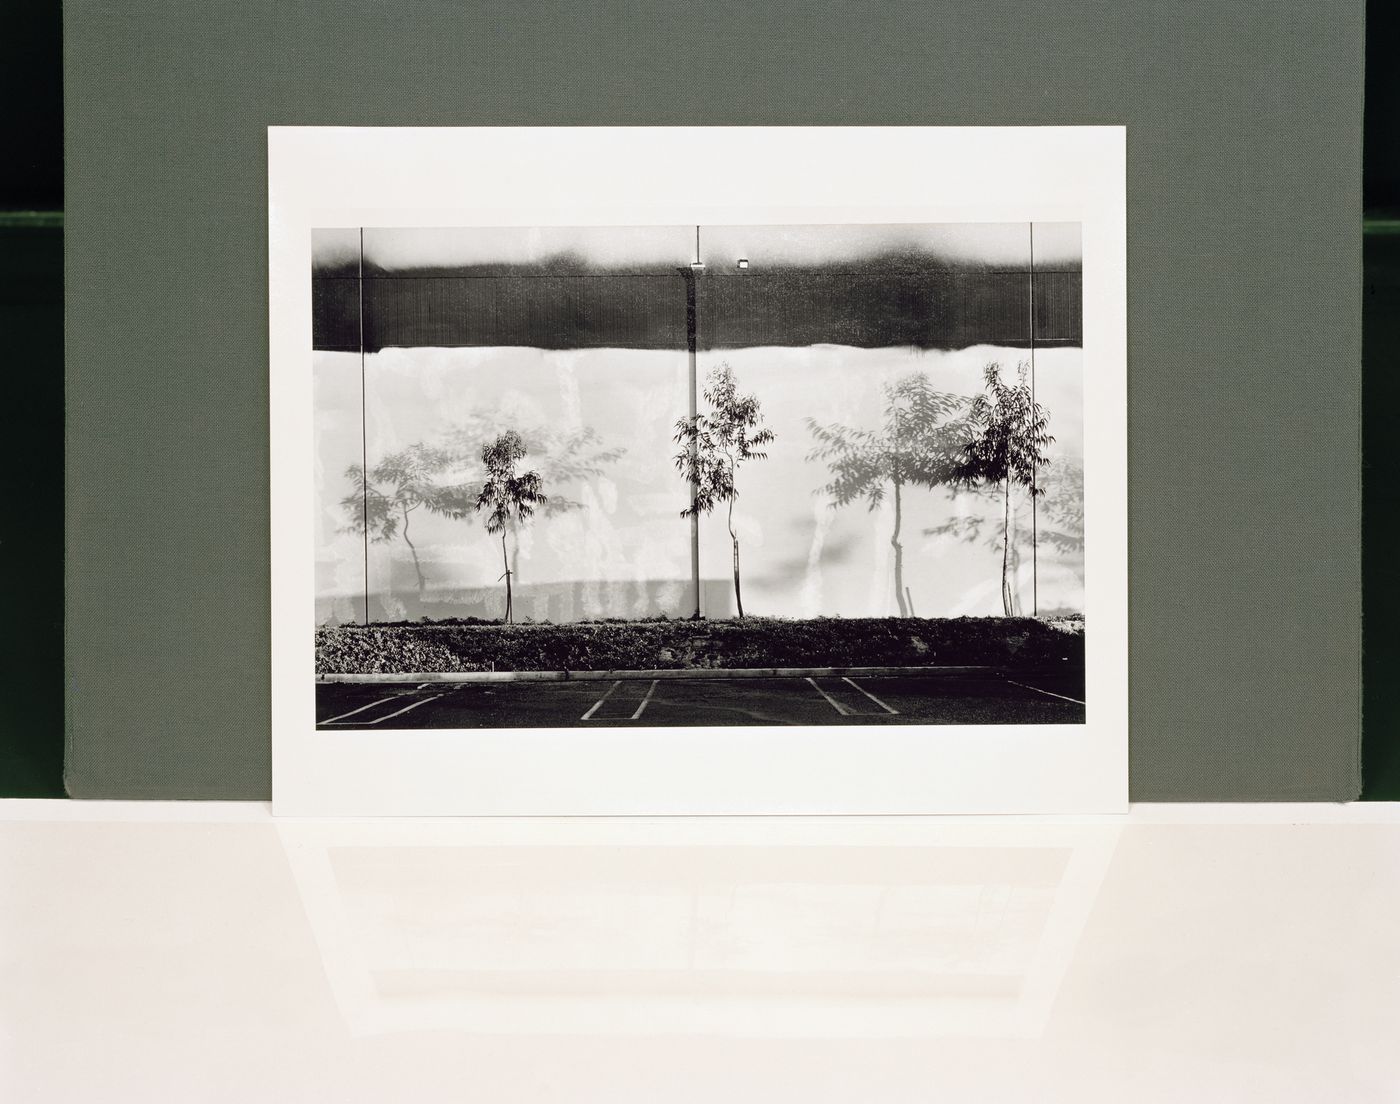 Questioning Pictures: Photograph of West Wall of Smicoa, Gelatin silver print by Lewis Baltz, 1974